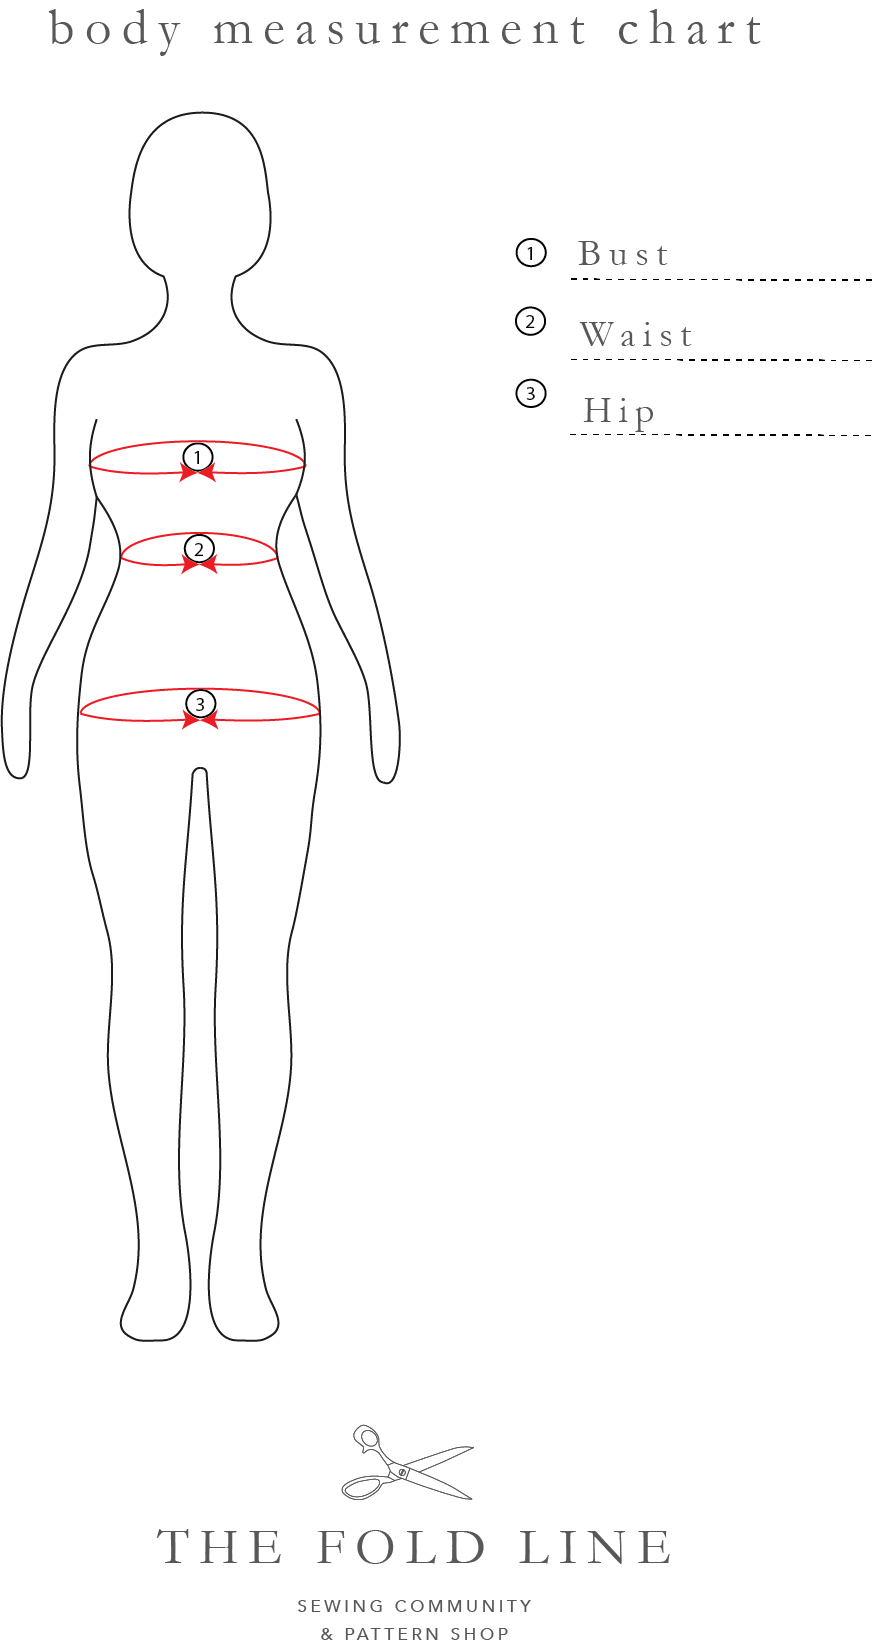 The Sewing Pattern Tutorials 9: Measuring yourself - The Fold Line